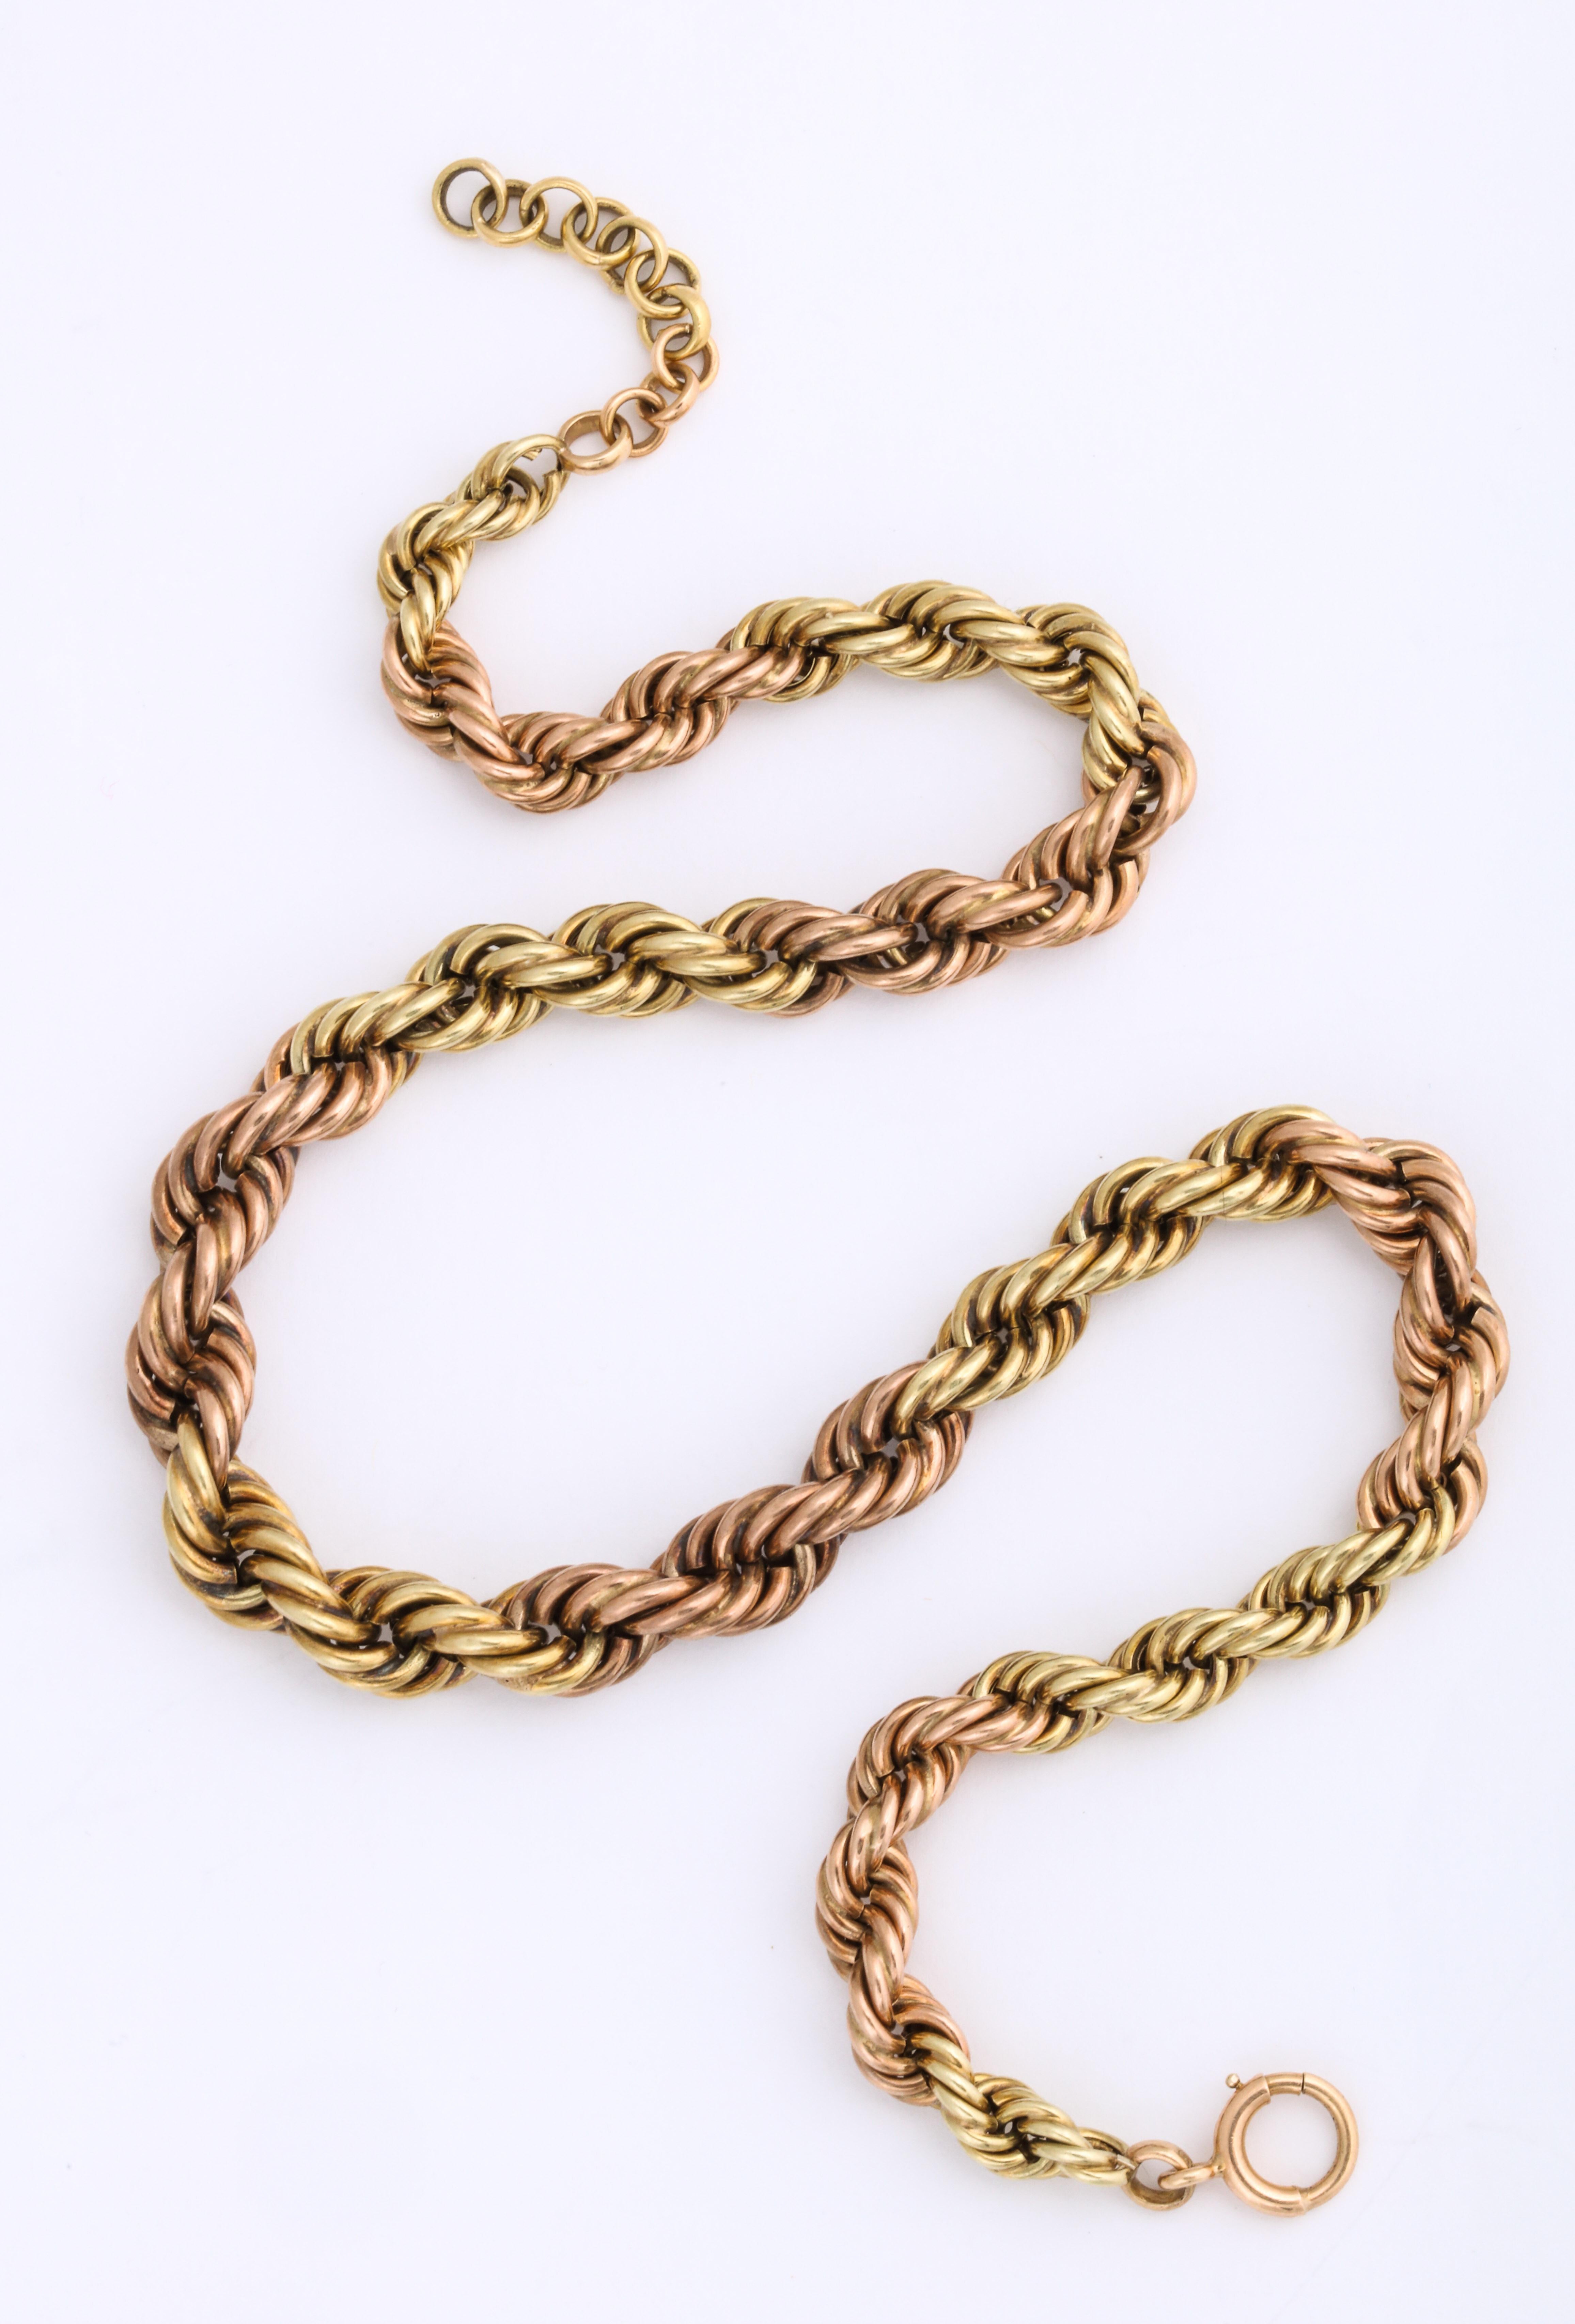 A 1940's American warm gold necklace of 14 Kt falls to the nape of the neck. It was made by the Albany New York firm of Binder and Binder. The length can be increased by adding round links next to the clasp. The necklace is made of two twisted ropes